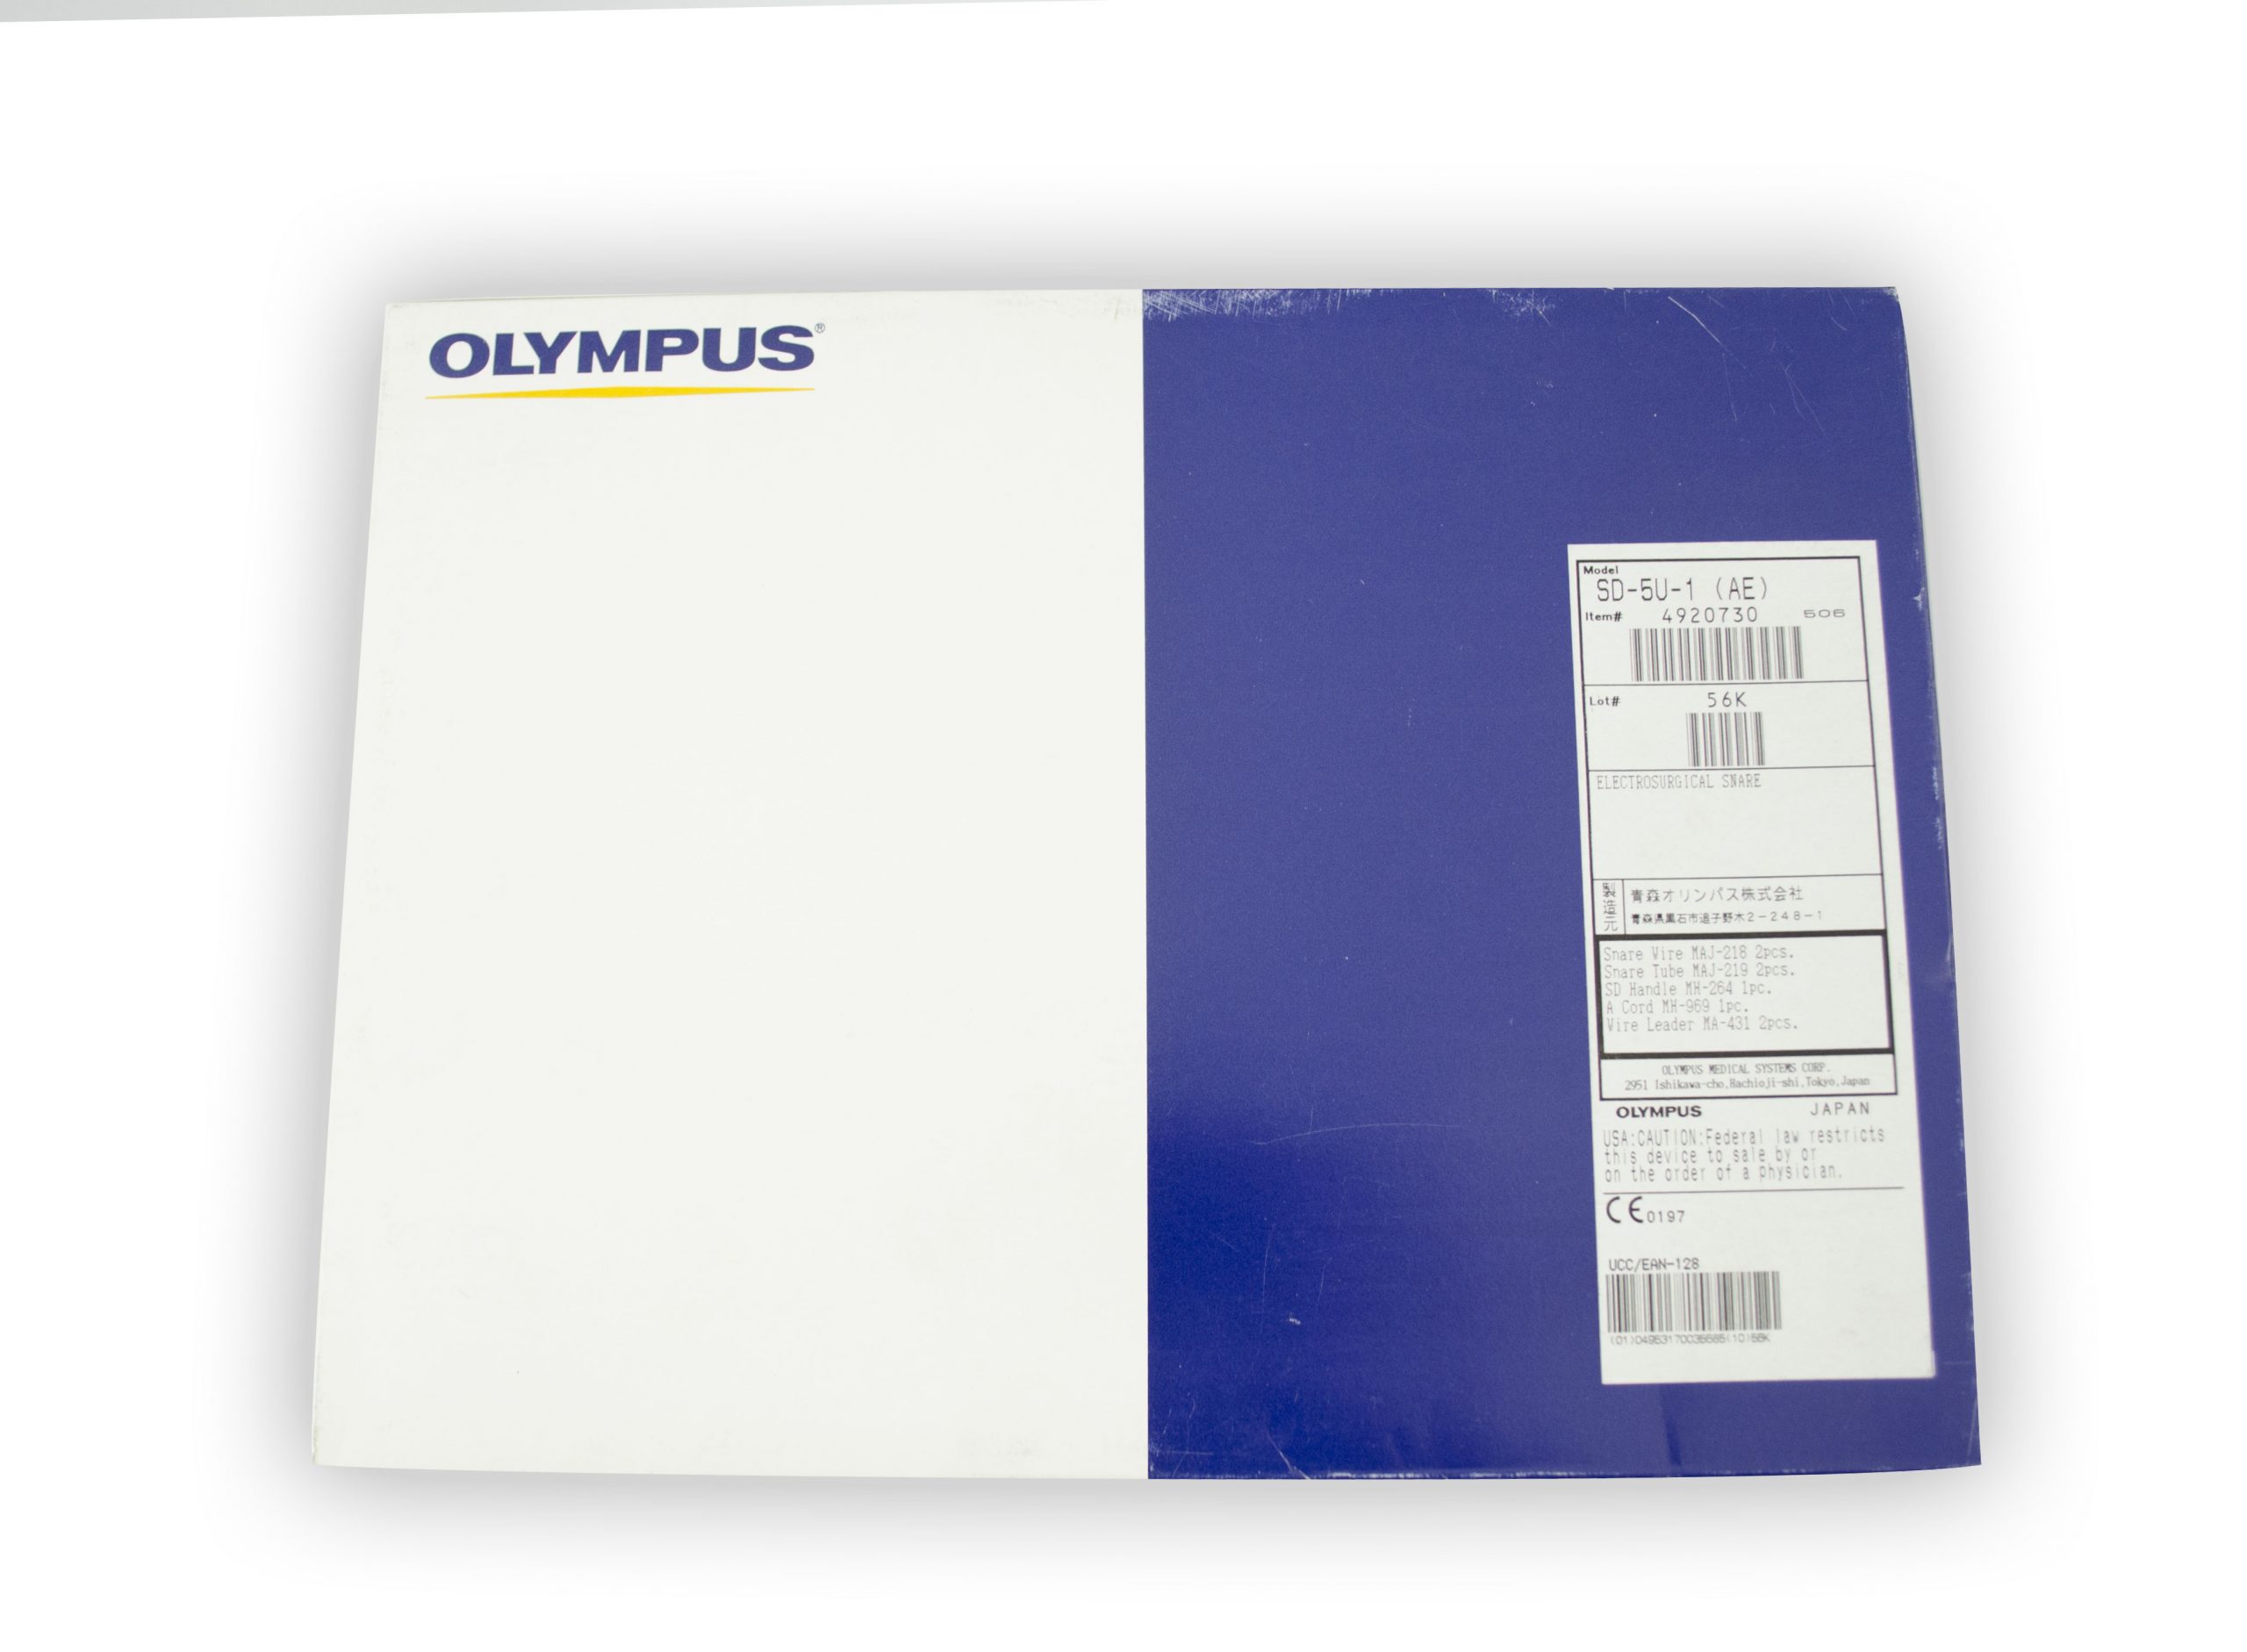 Olympus Reusable Diathermy Snare - SD-5U-1 (2 Snares, 1 Handle, 1 A Cord, 2 Wire Leaders)